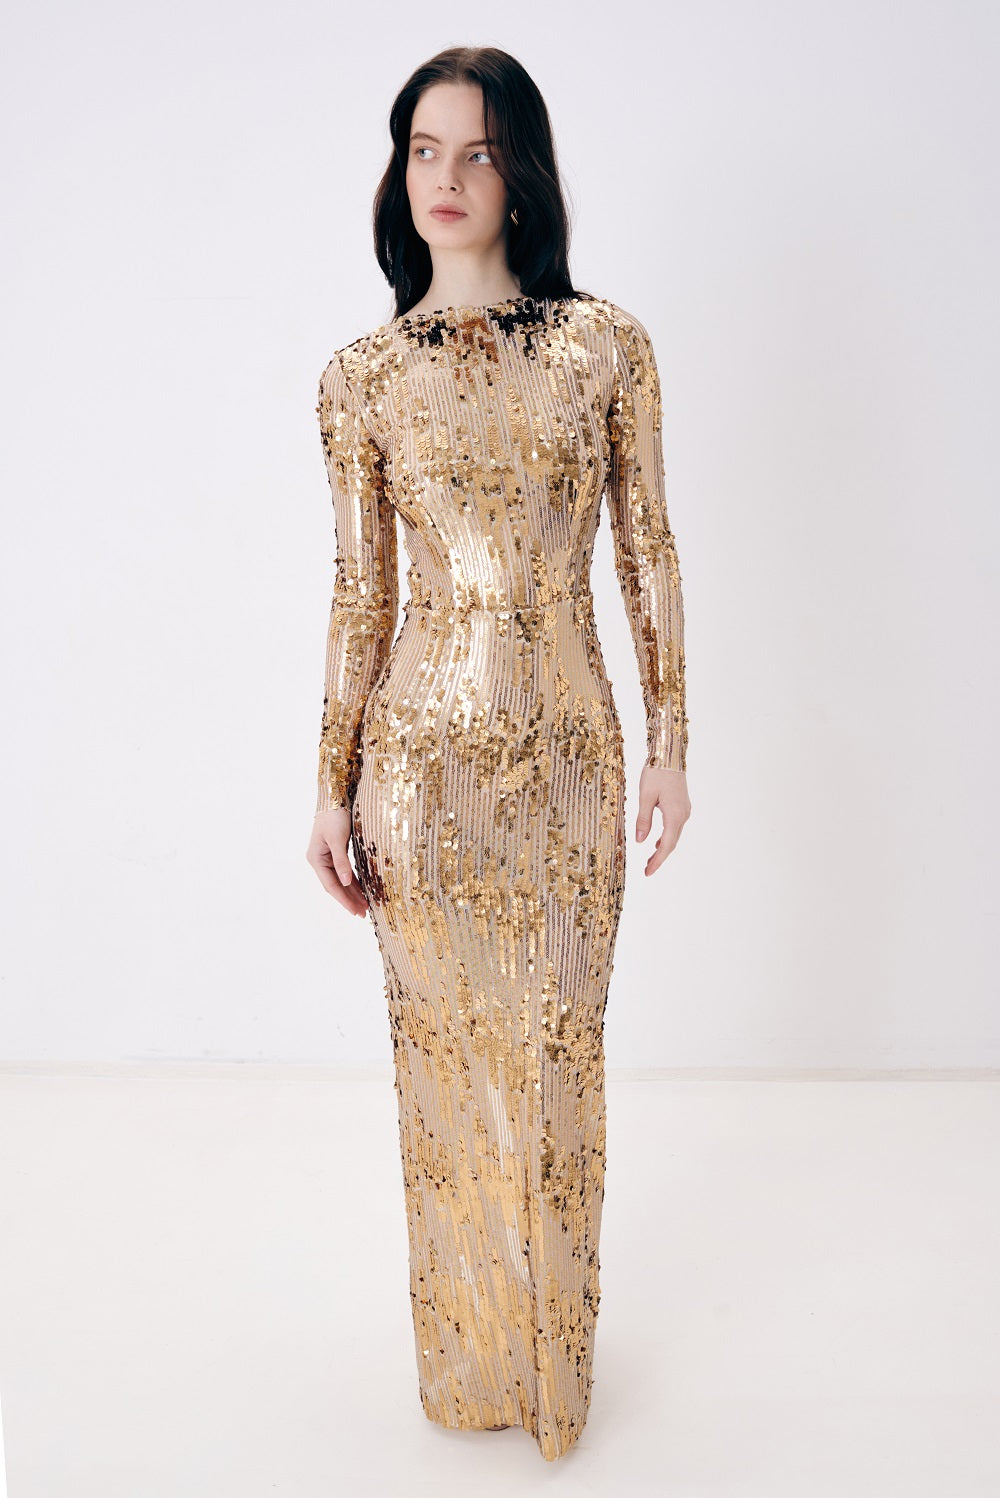 Sequined Gold Dress